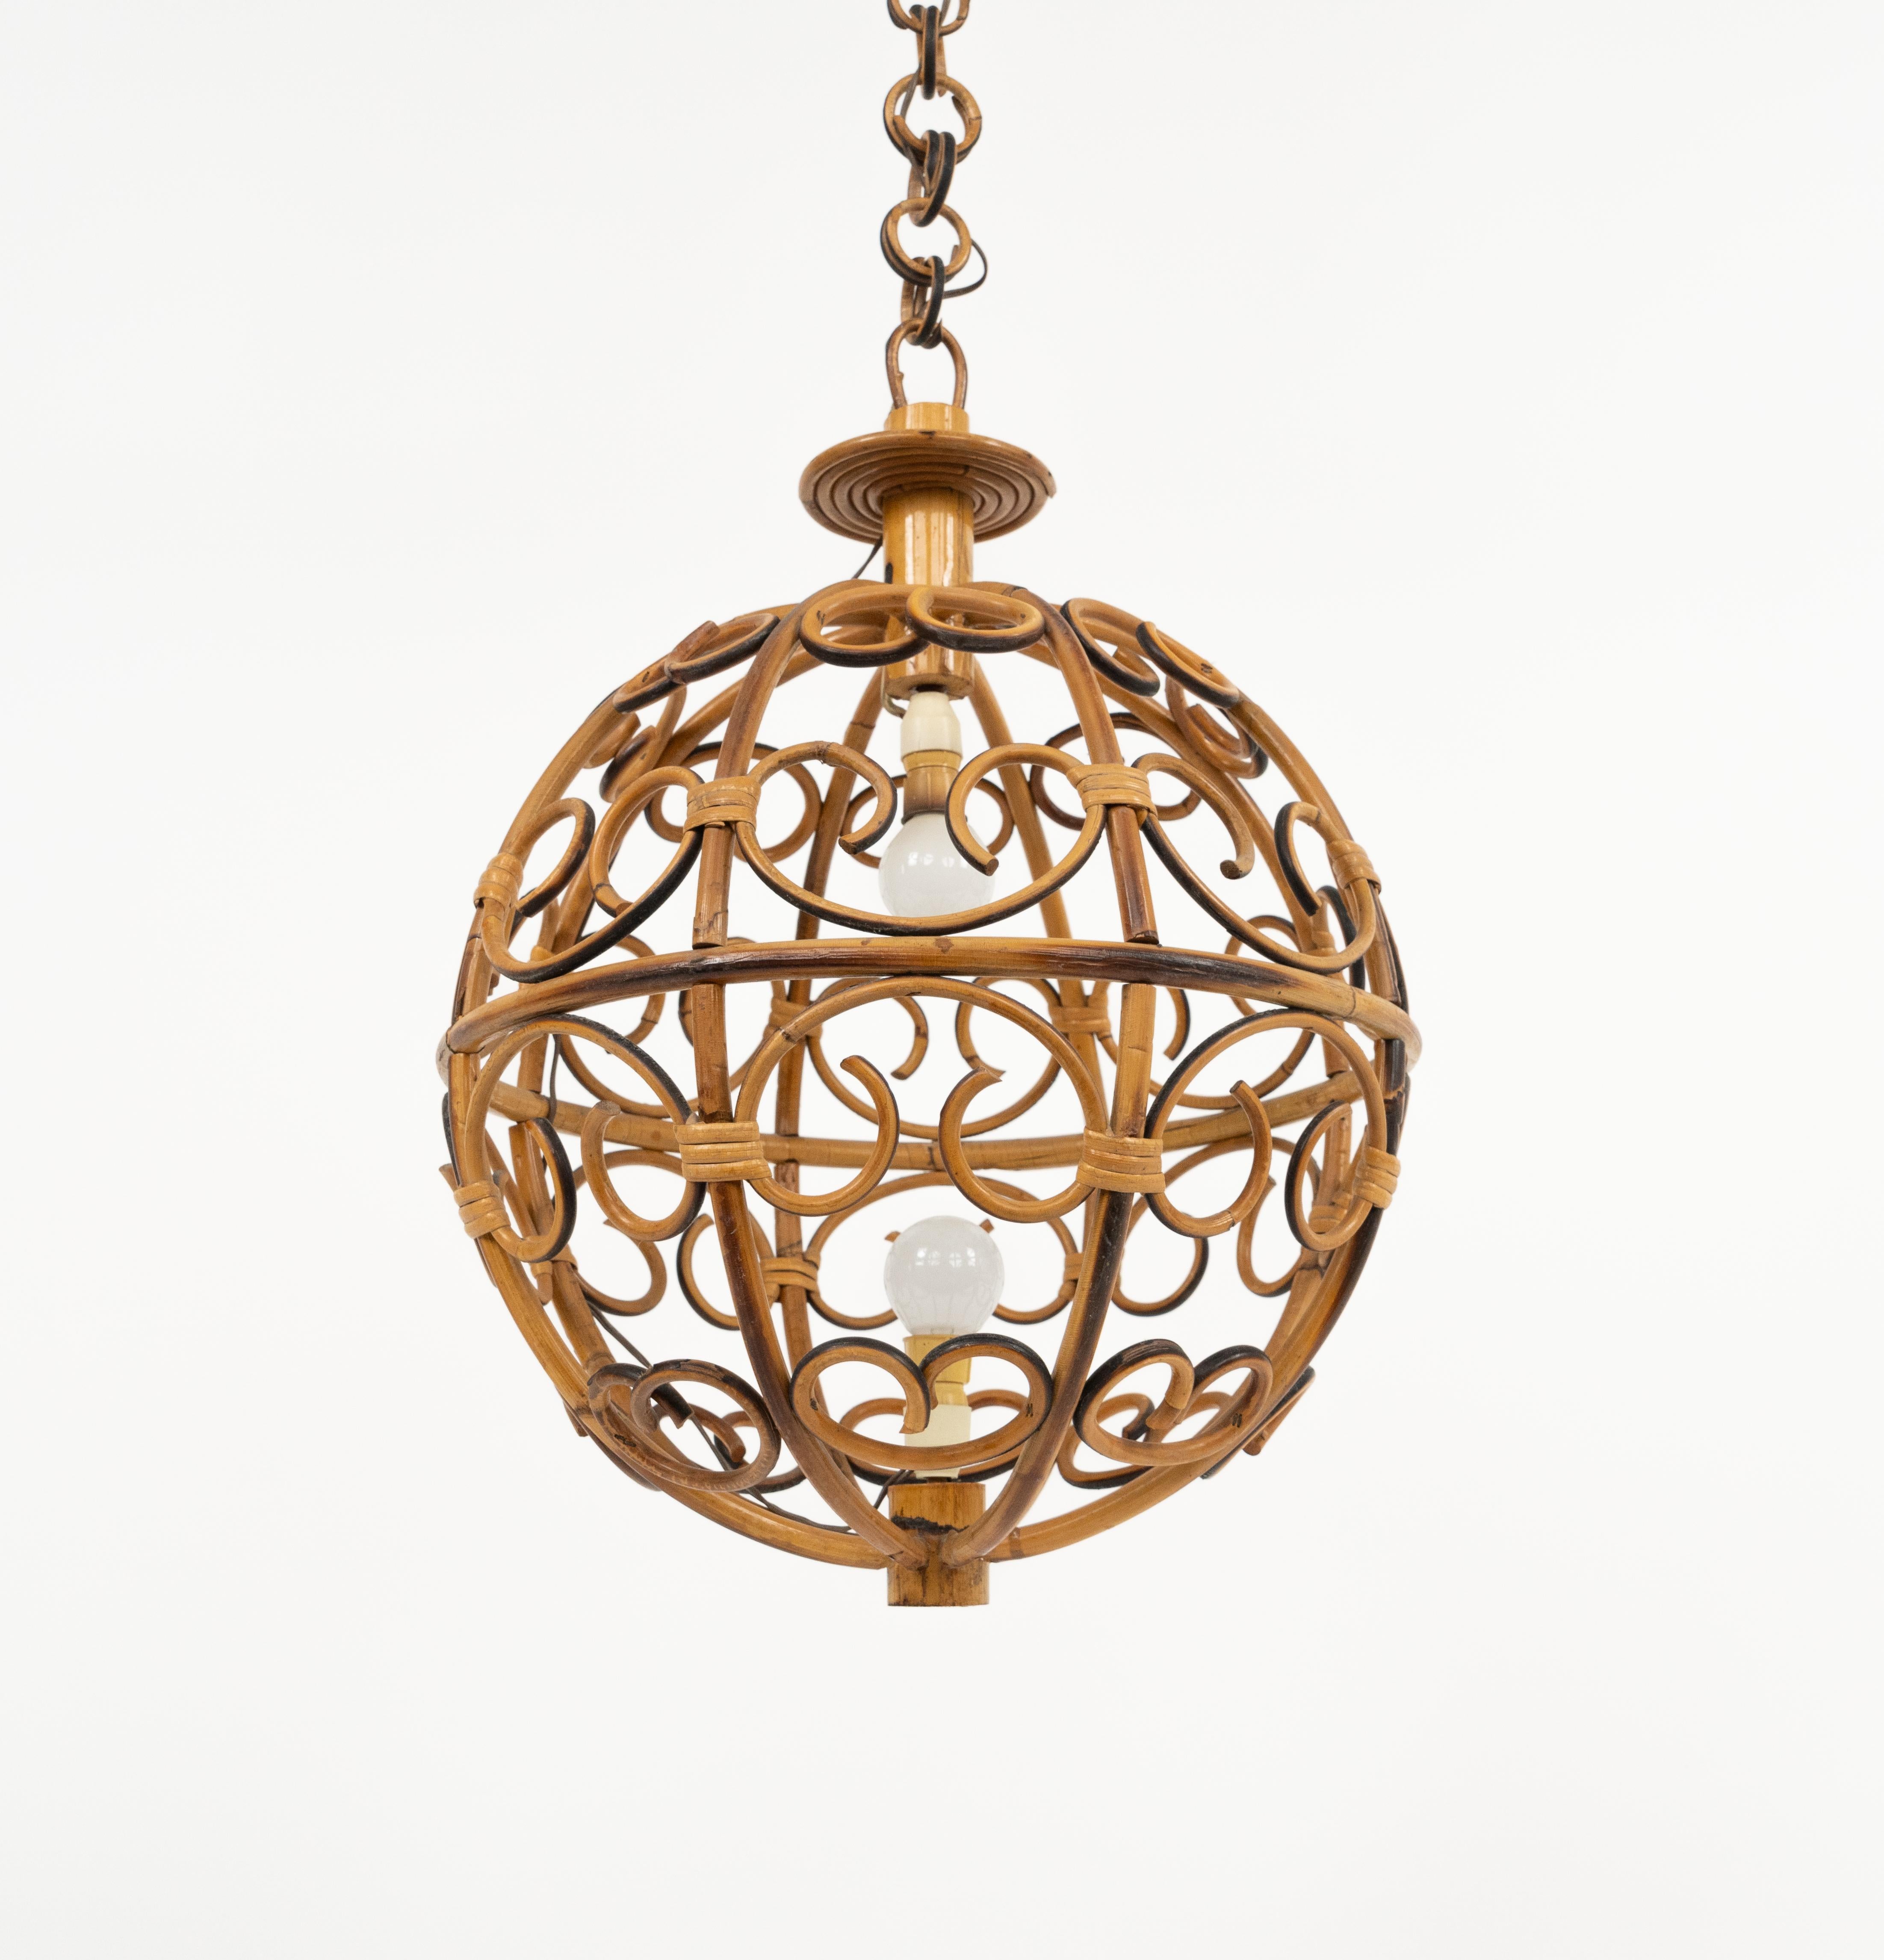 Hand-Crafted Midcentury Globe Chandelier in Rattan and Bamboo, Italy 1960s For Sale